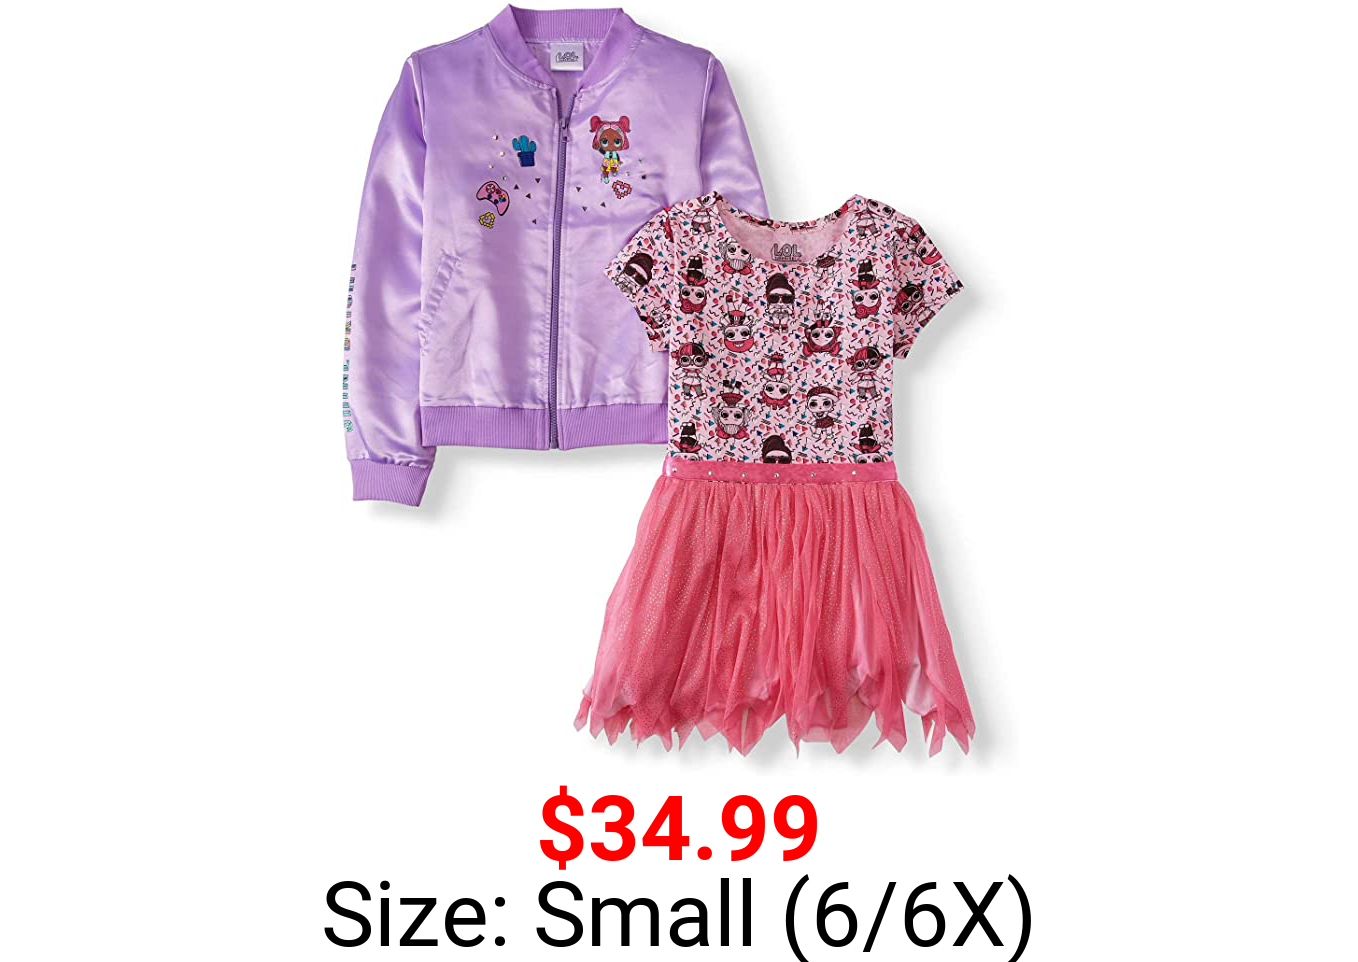 L.O.L. Surprise! Jacket and Tutu Dress for Girls Sizes 4-16